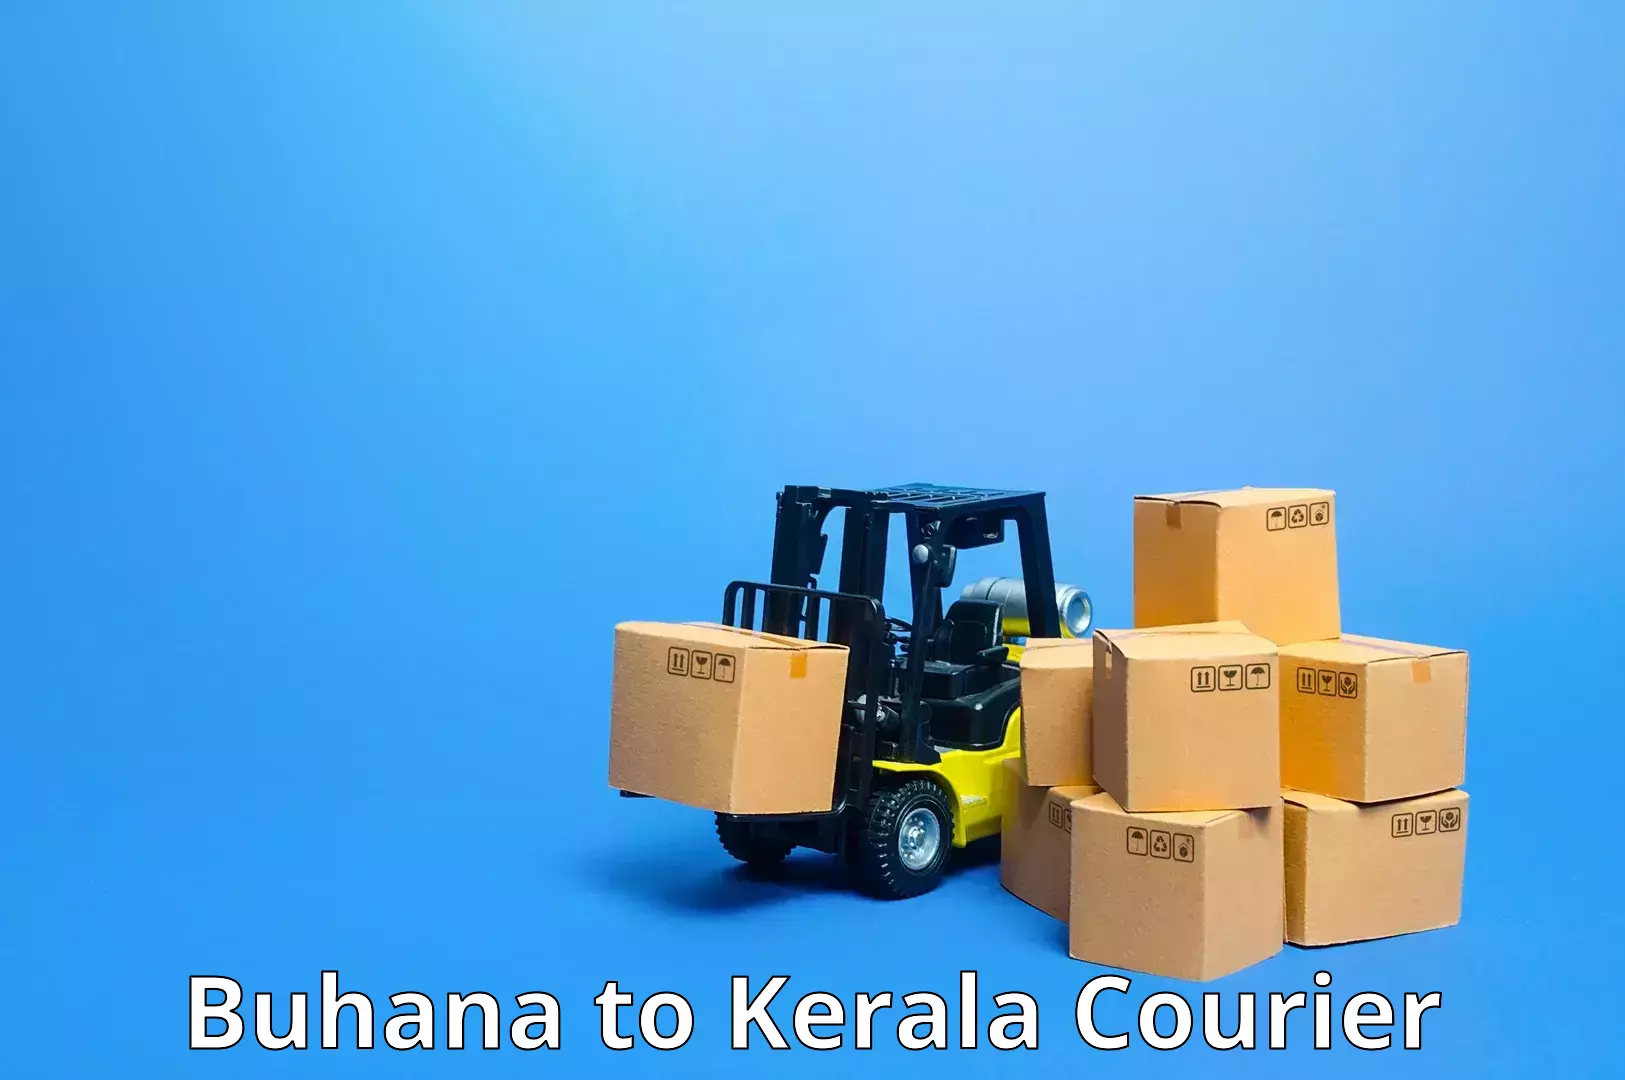 Efficient package consolidation Buhana to Kerala